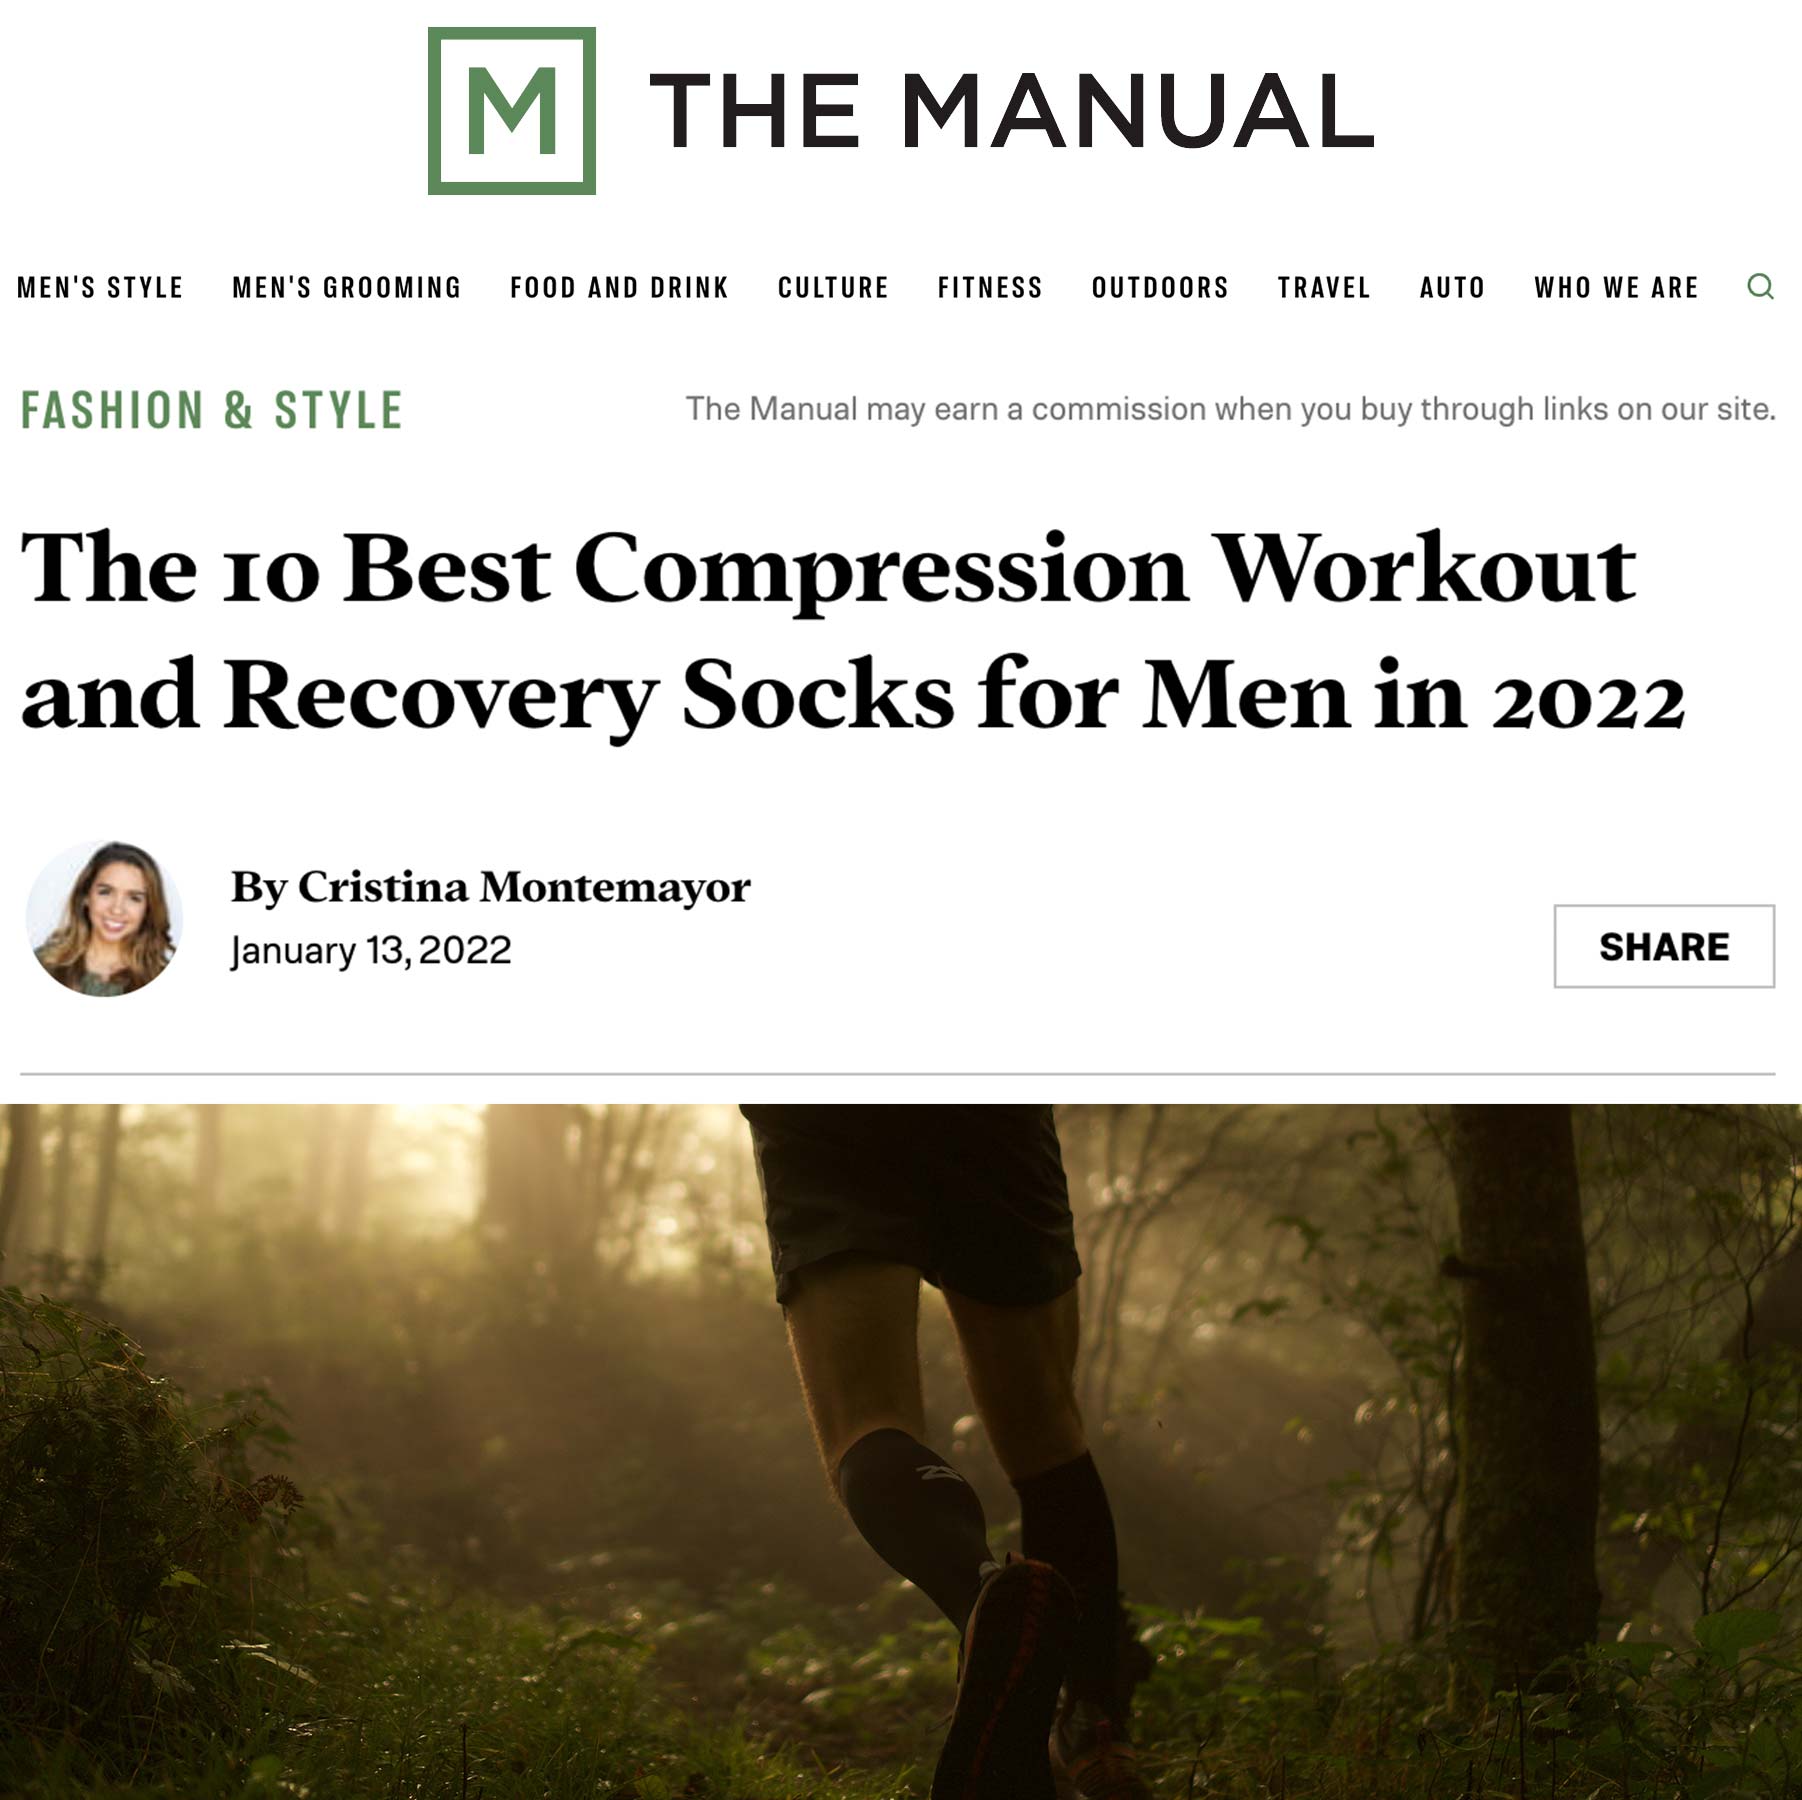 The Manual: The 10 Best Compression Workout and Recovery Socks for Men in 2022